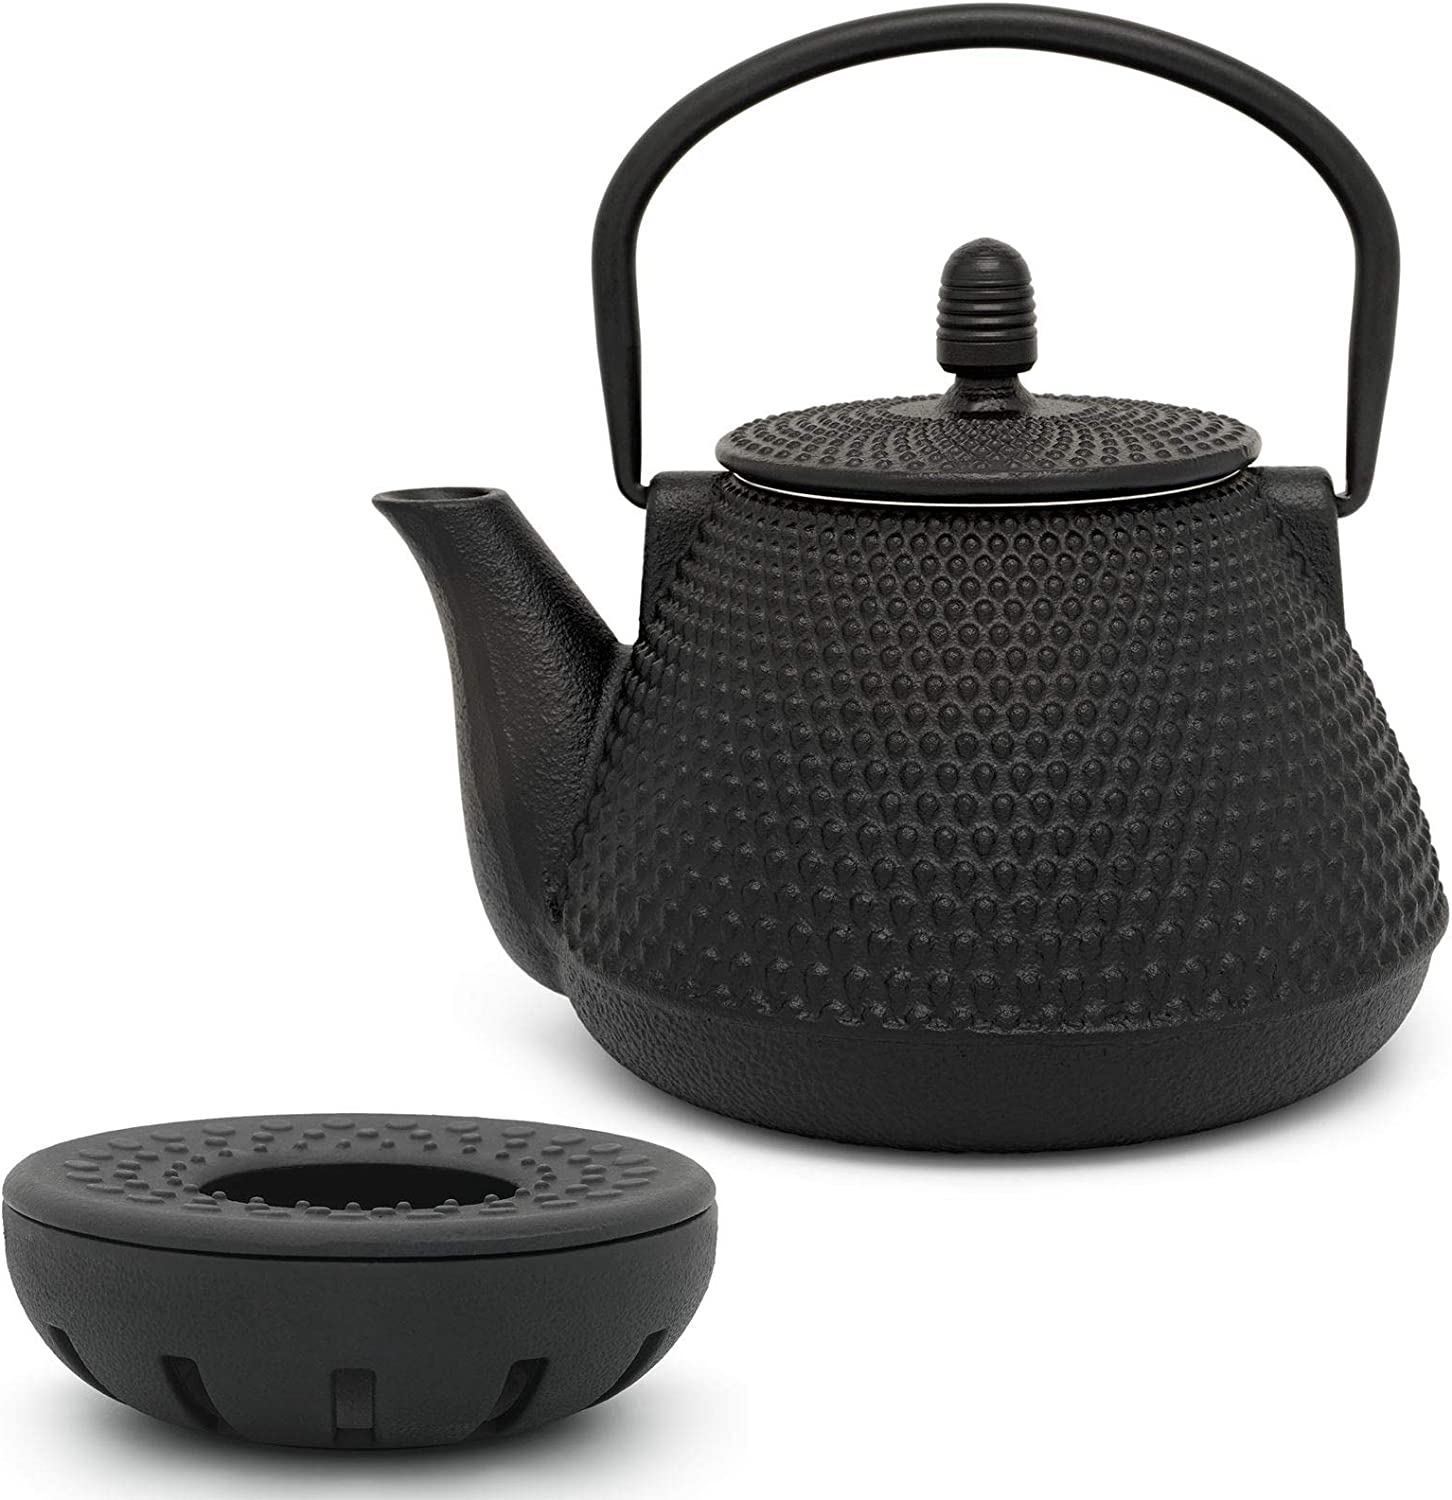 Bredemeijer Teapot Asian Cast Iron Set 1.0 Litres - Black Cast Iron Can with Strainer Insert for Loose Tea and Warmer